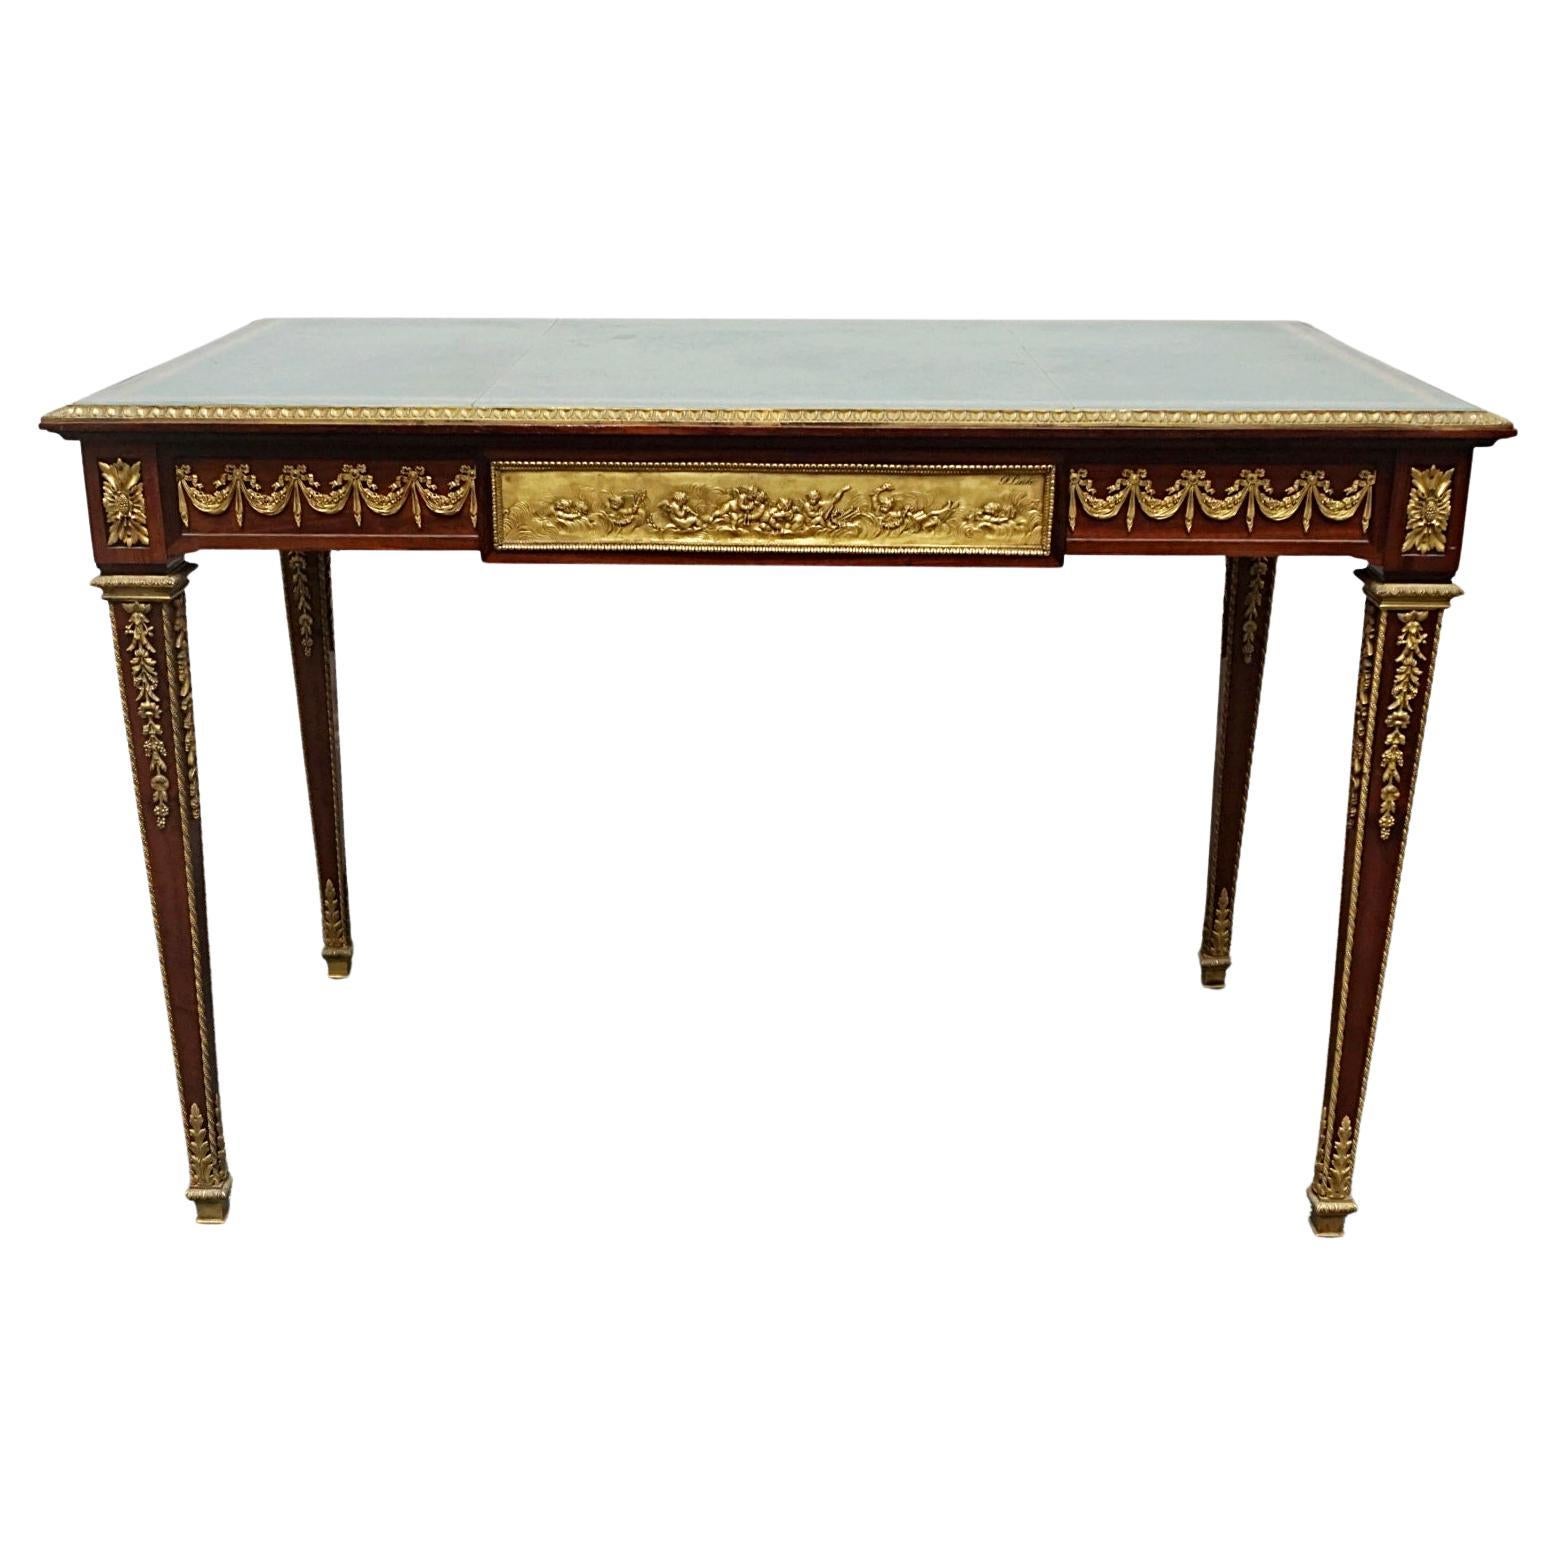 Louis XVI Style Gilt-Bronze Mounted Kingwood Writing Table by Francois Linke For Sale